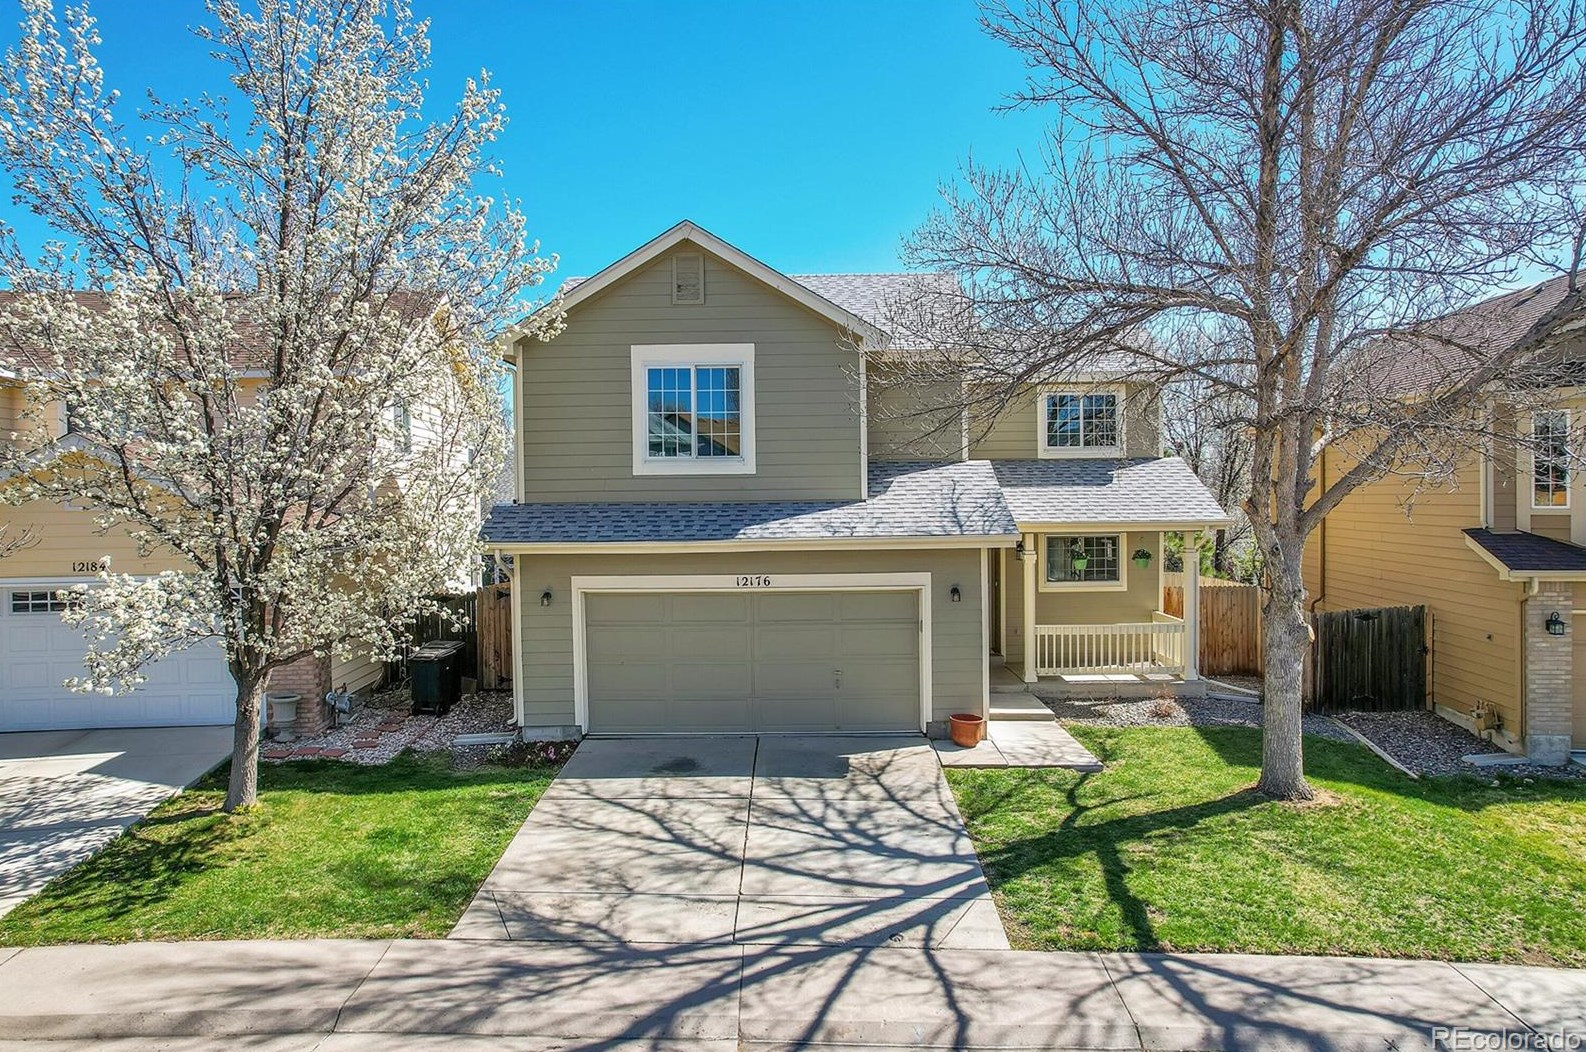 12176 Cherrywood St, Westminster, CO 80020-7979